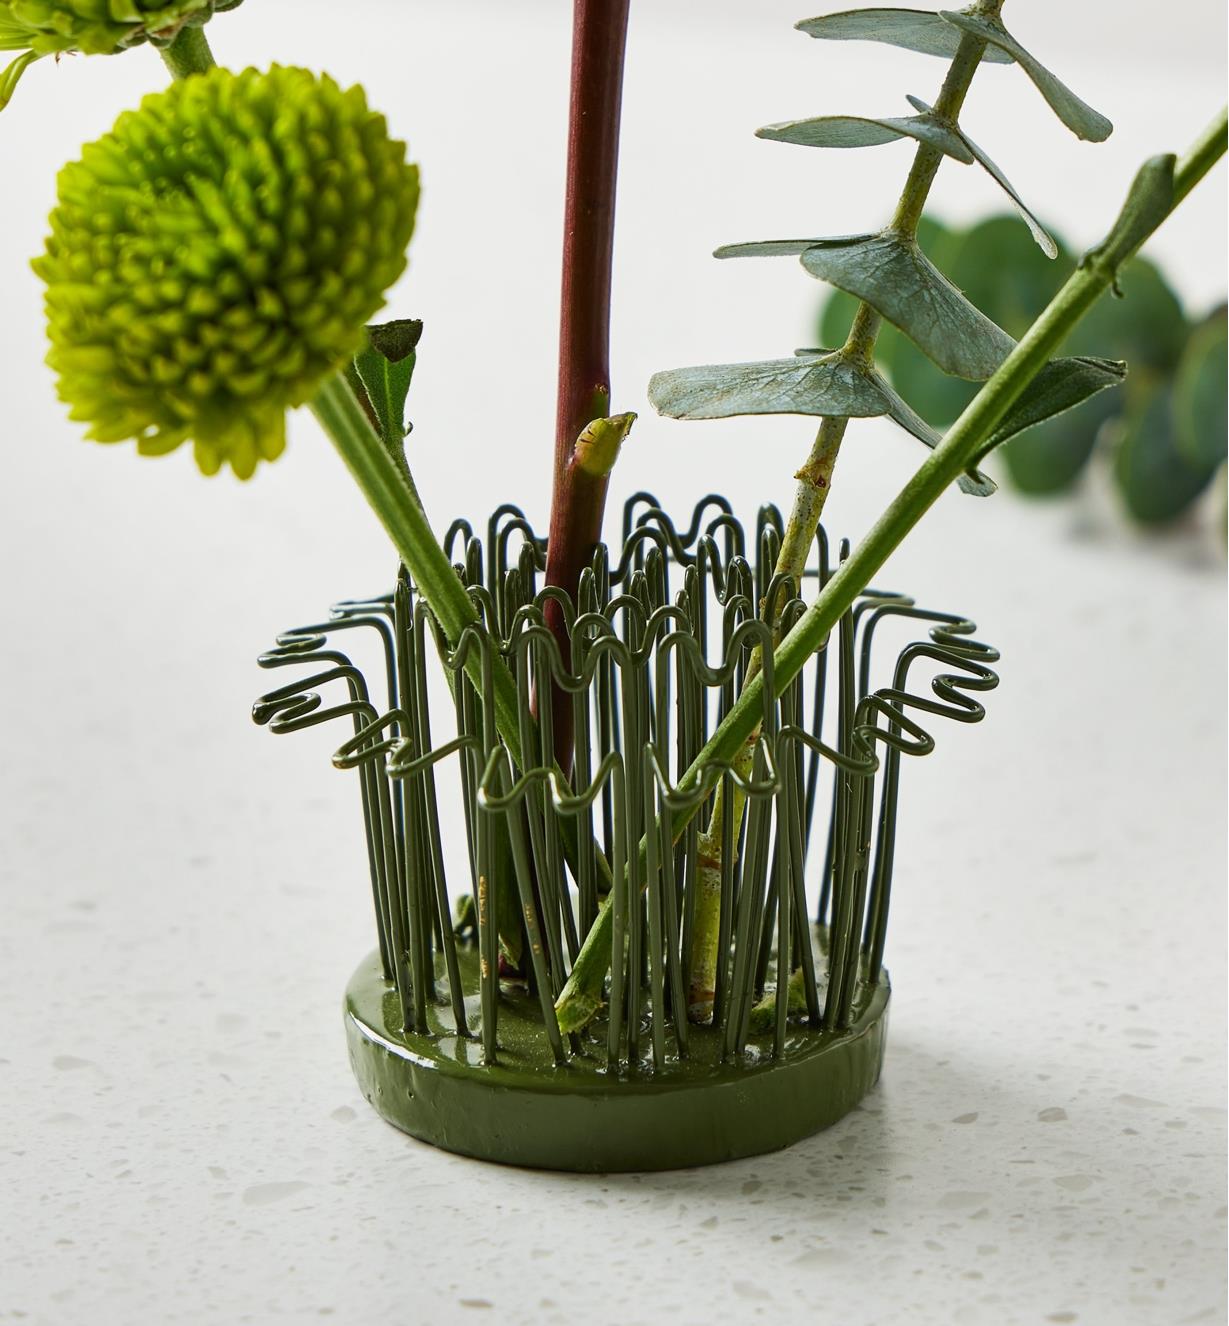 Flower stems inserted into the Blue Ribbon flower holder at different angles